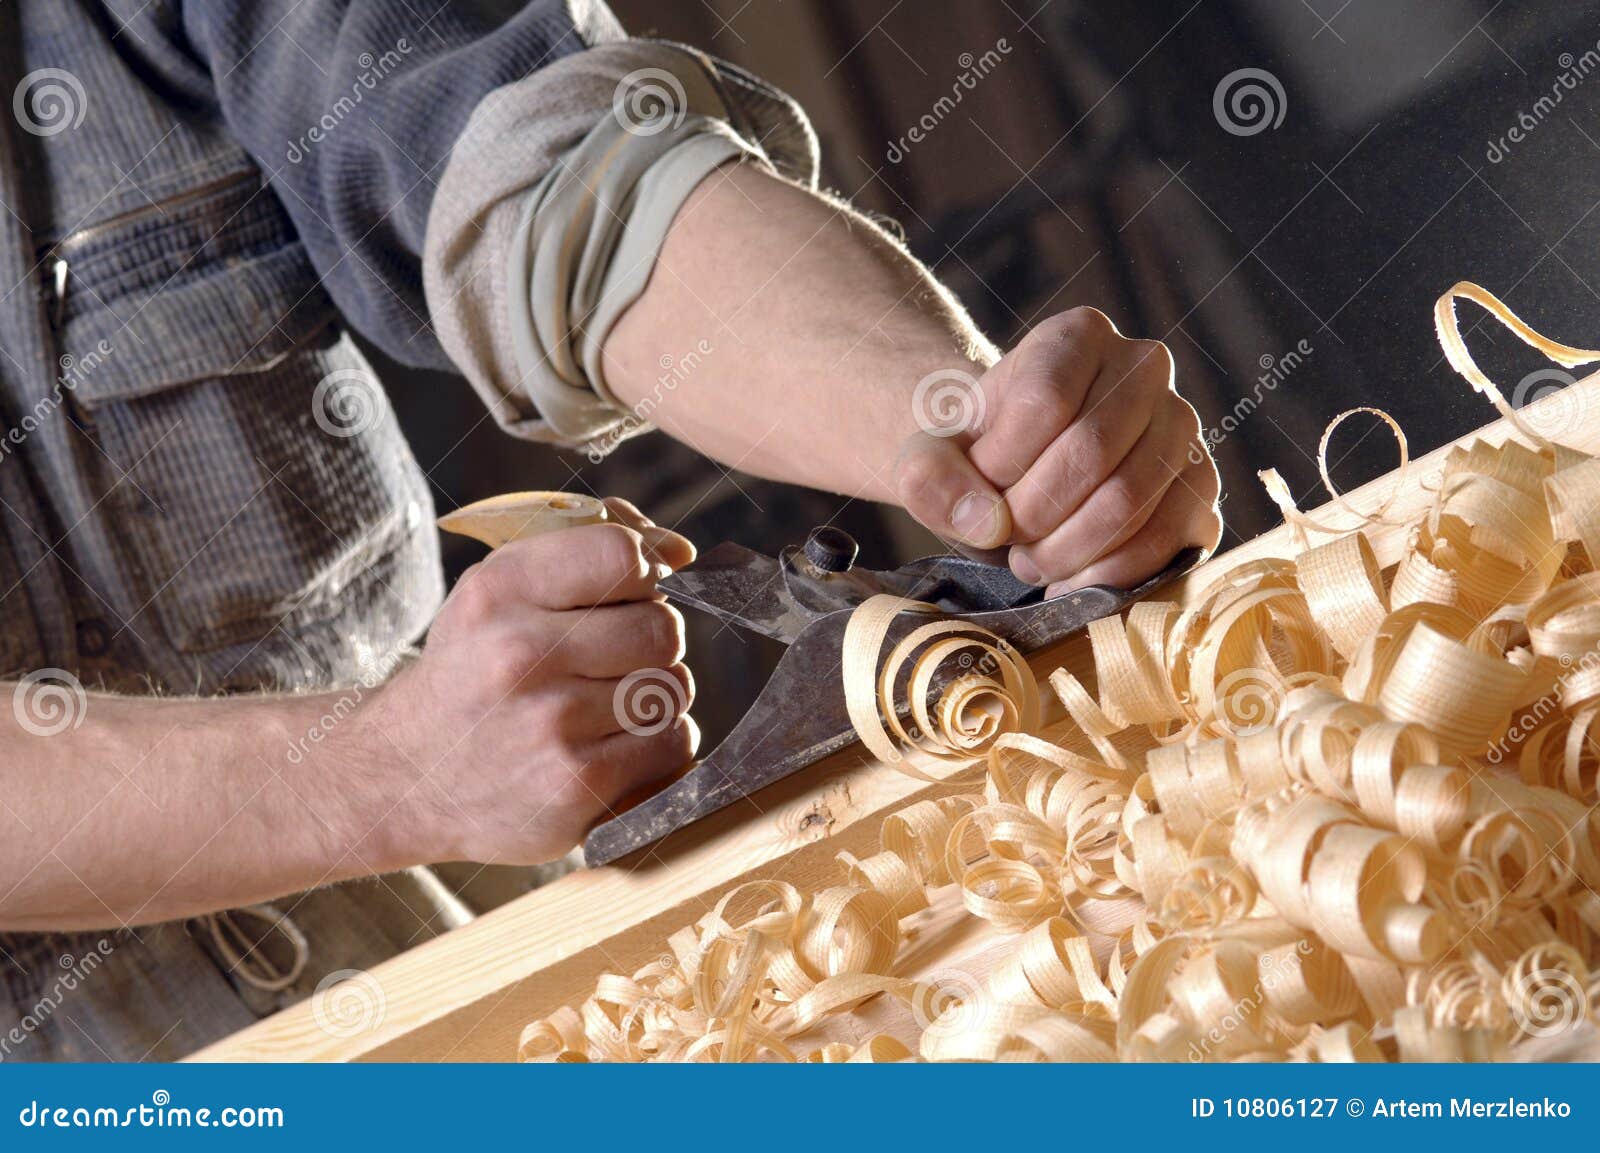 Working Hands Royalty Free Stock Photography - Image: 10806127